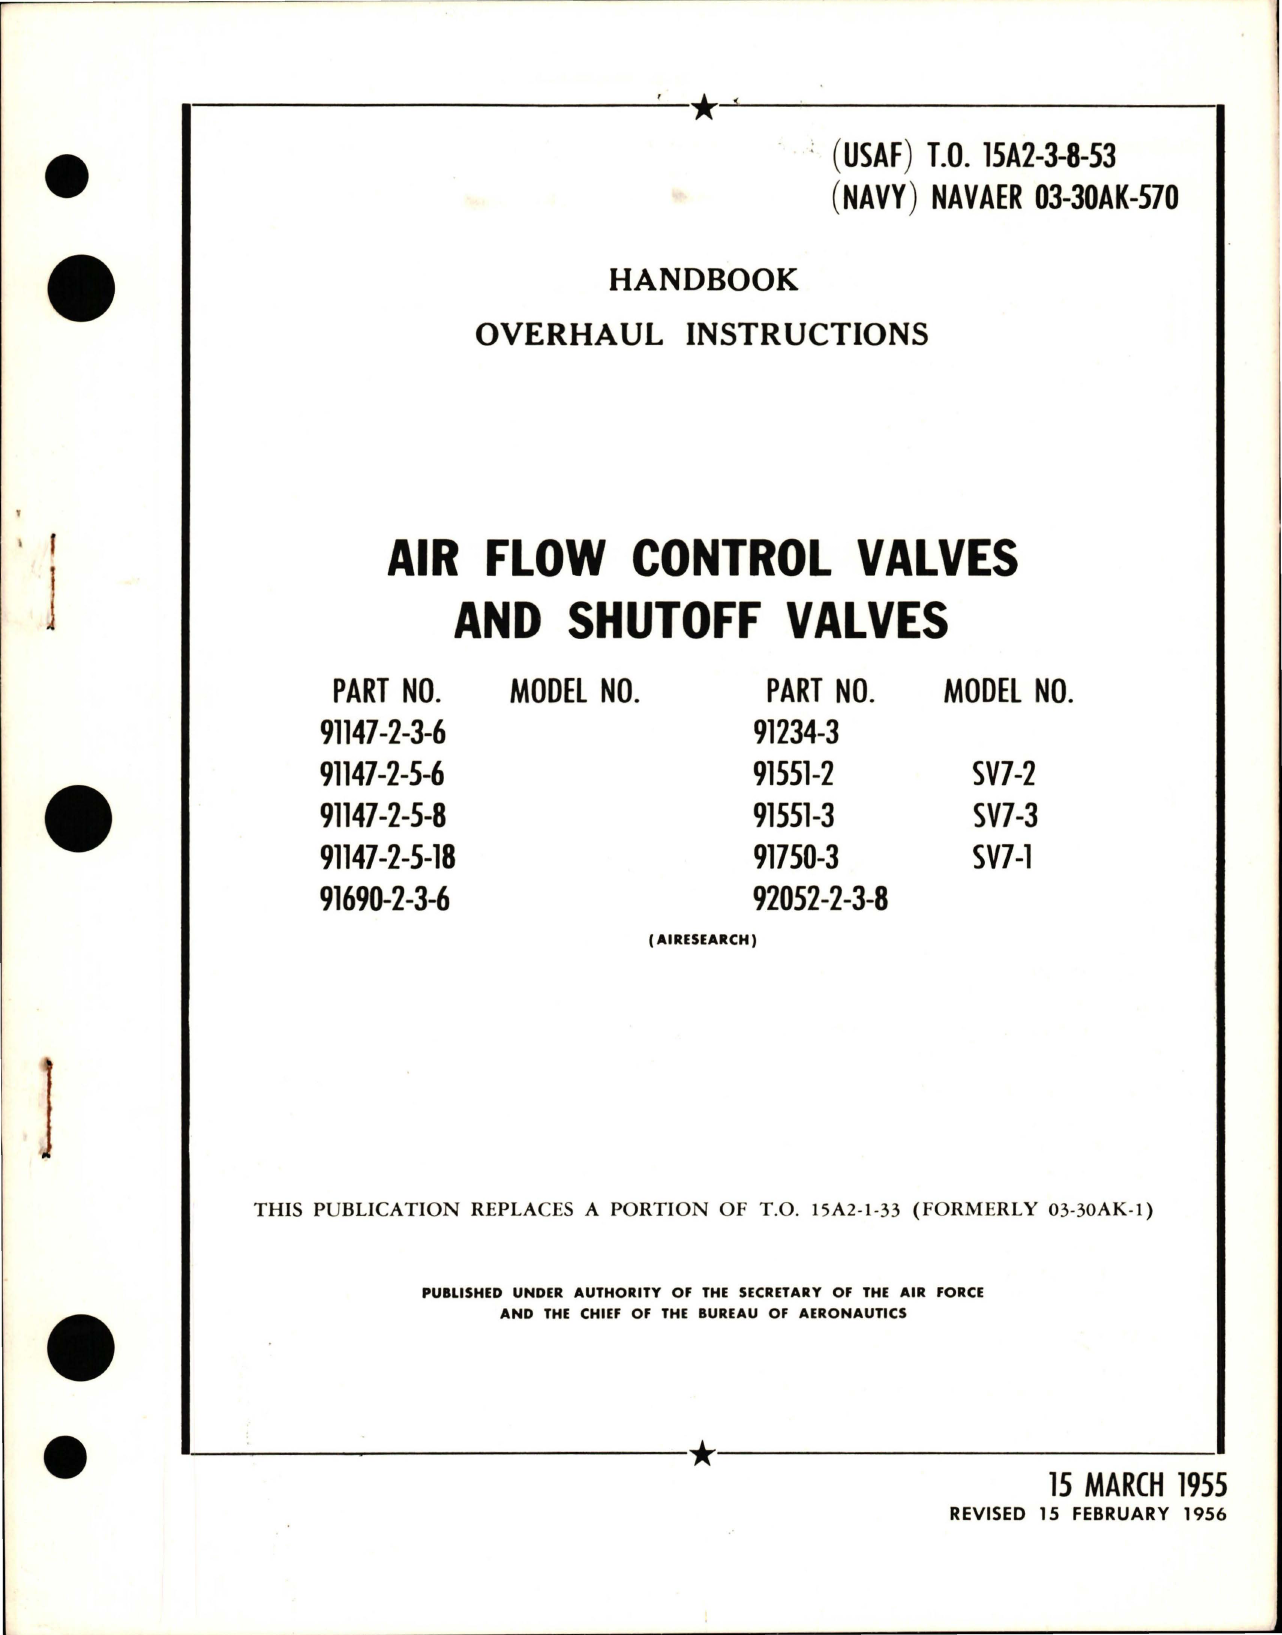 Sample page 1 from AirCorps Library document: Overhaul Instructions for Air Flow Control Valves & Shutoff Valves - Models SV7-2, SV7-3, and V7-1